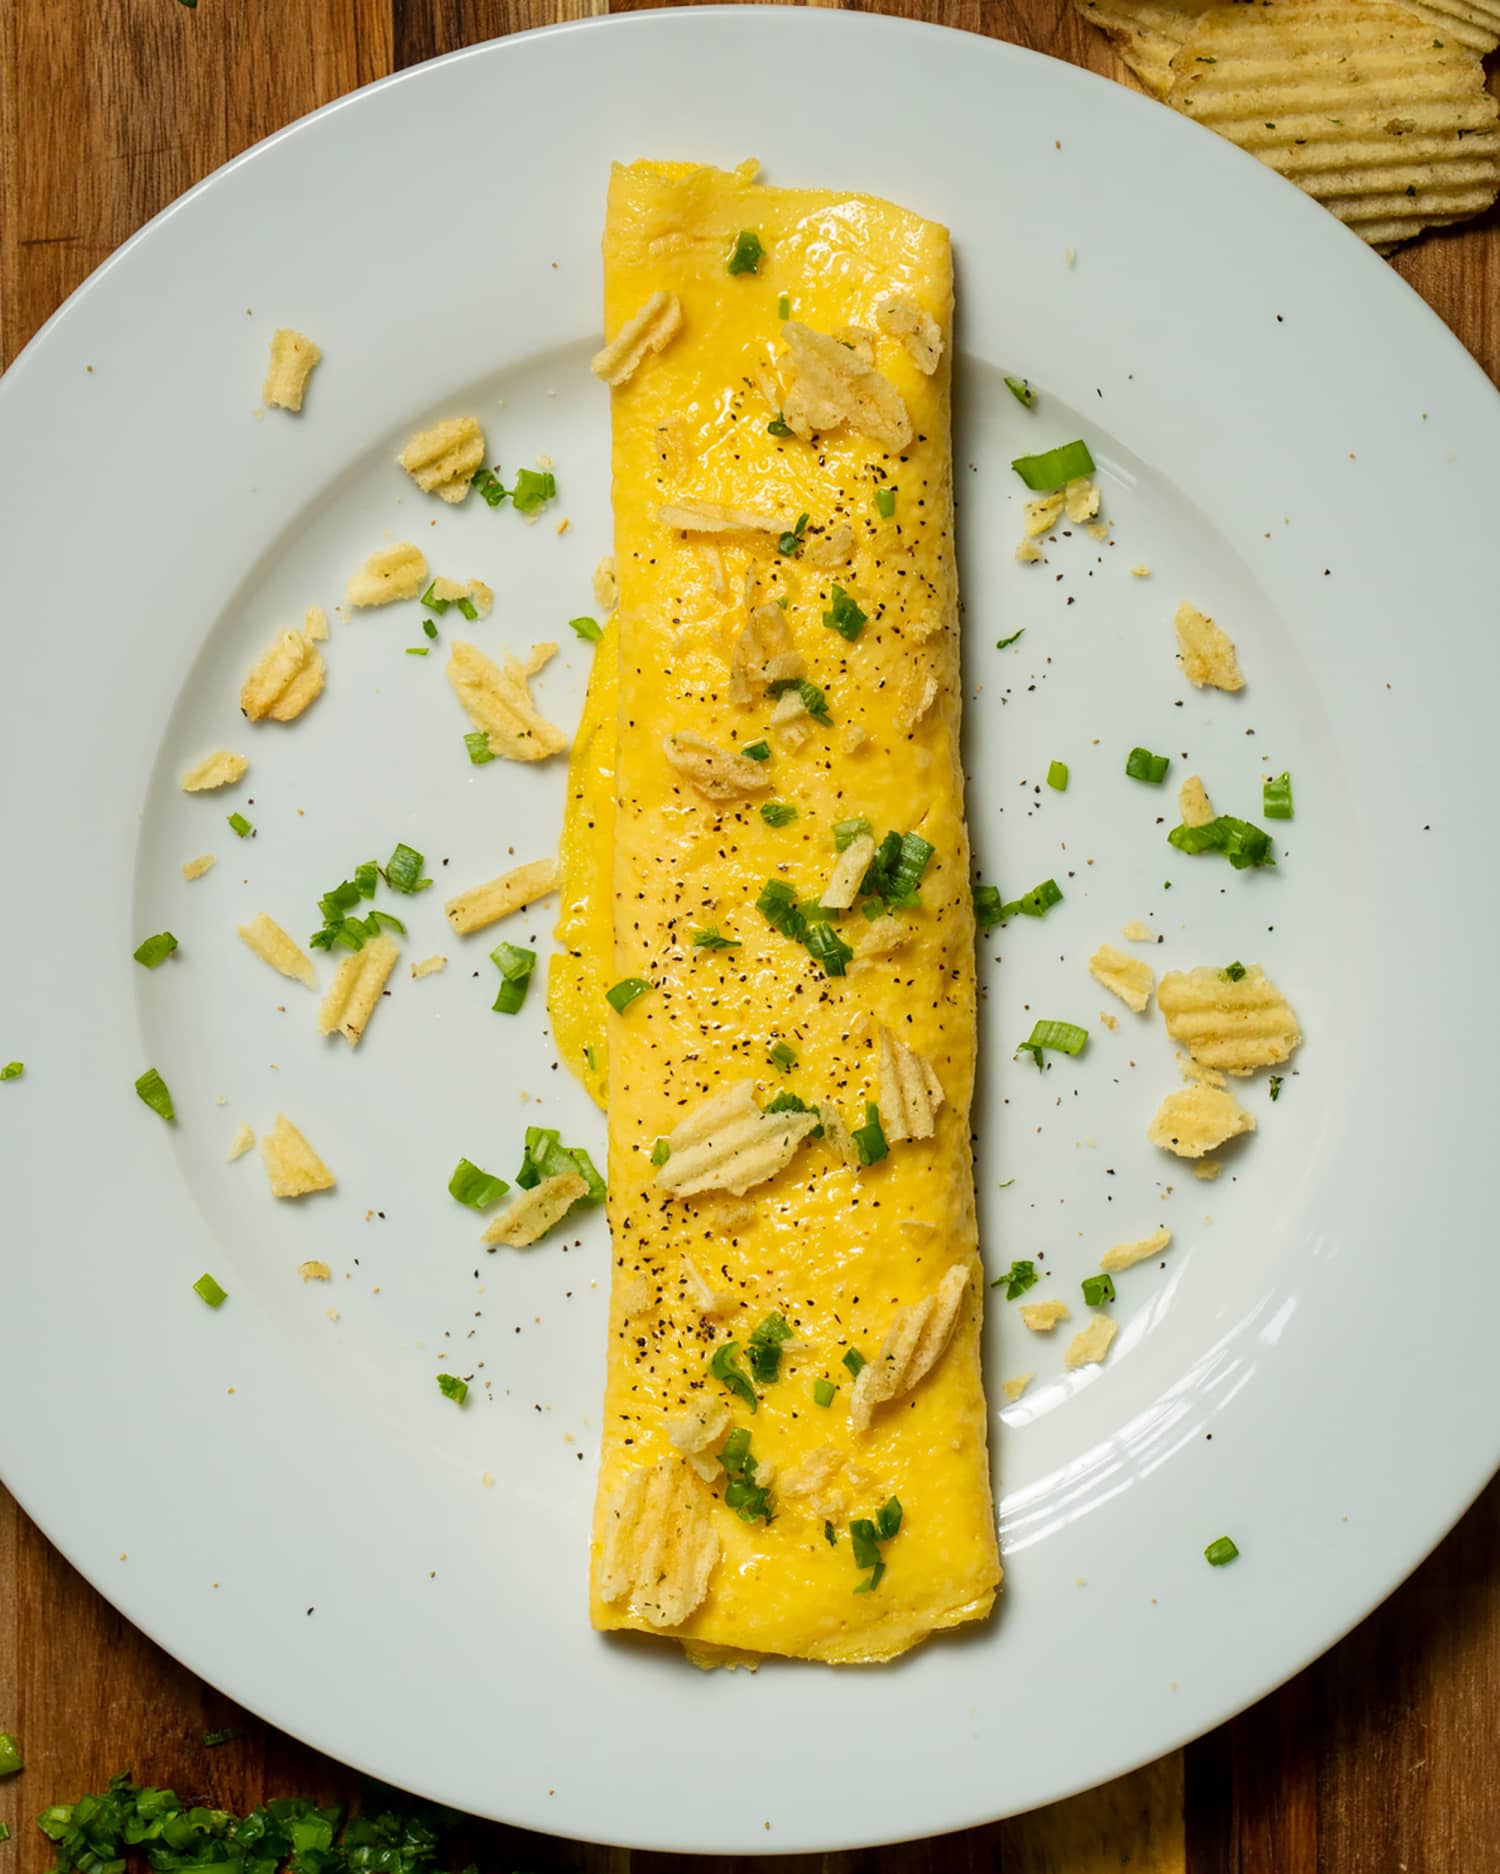 I Tried the Omelette from “The Bear” — And the Hype Is Real